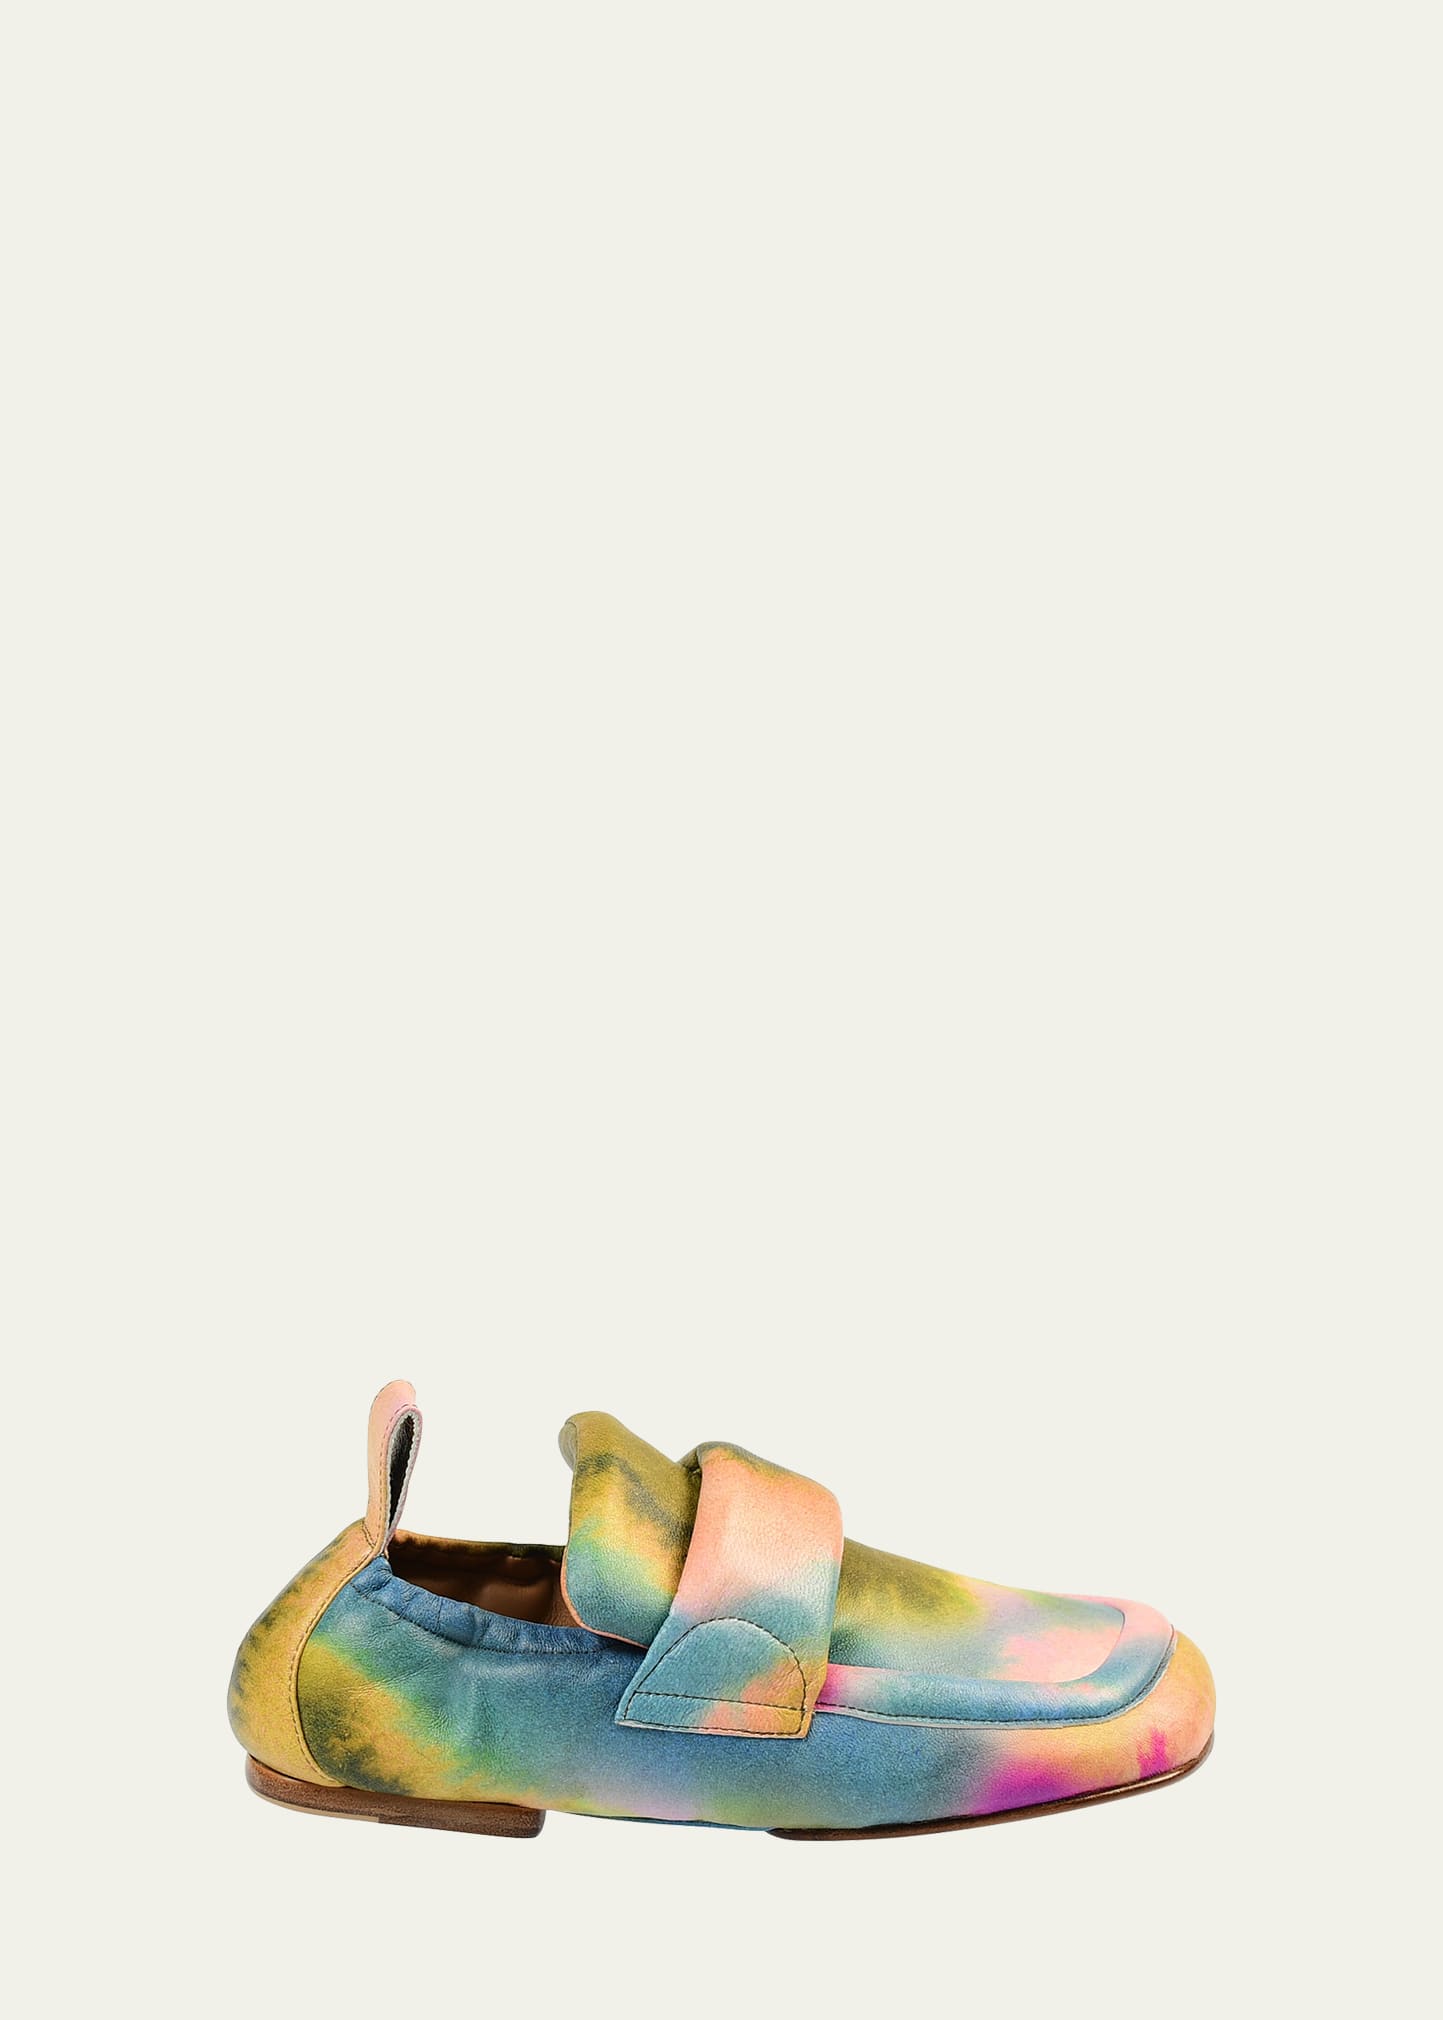 Dries Van Noten Multicolored Leather Loafers | Smart Closet